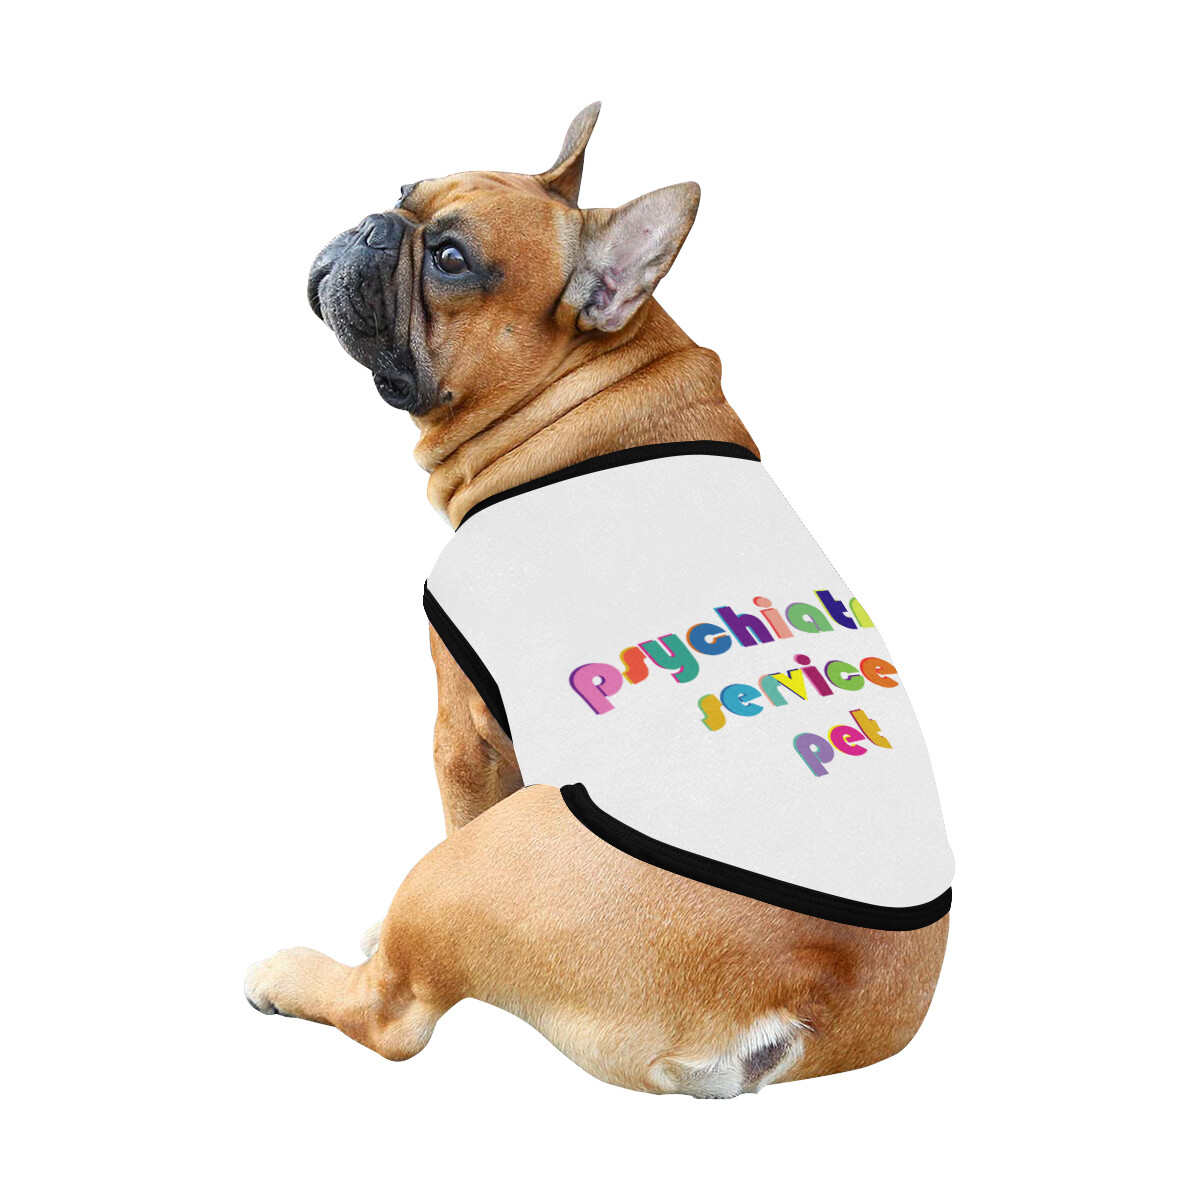 🐕 Psychiatric service pet Dog shirt, Dog Tank Top, Dog t-shirt, Dog clothes, Gifts, front back print, 7 sizes XS to 3XL, dog gifts, white